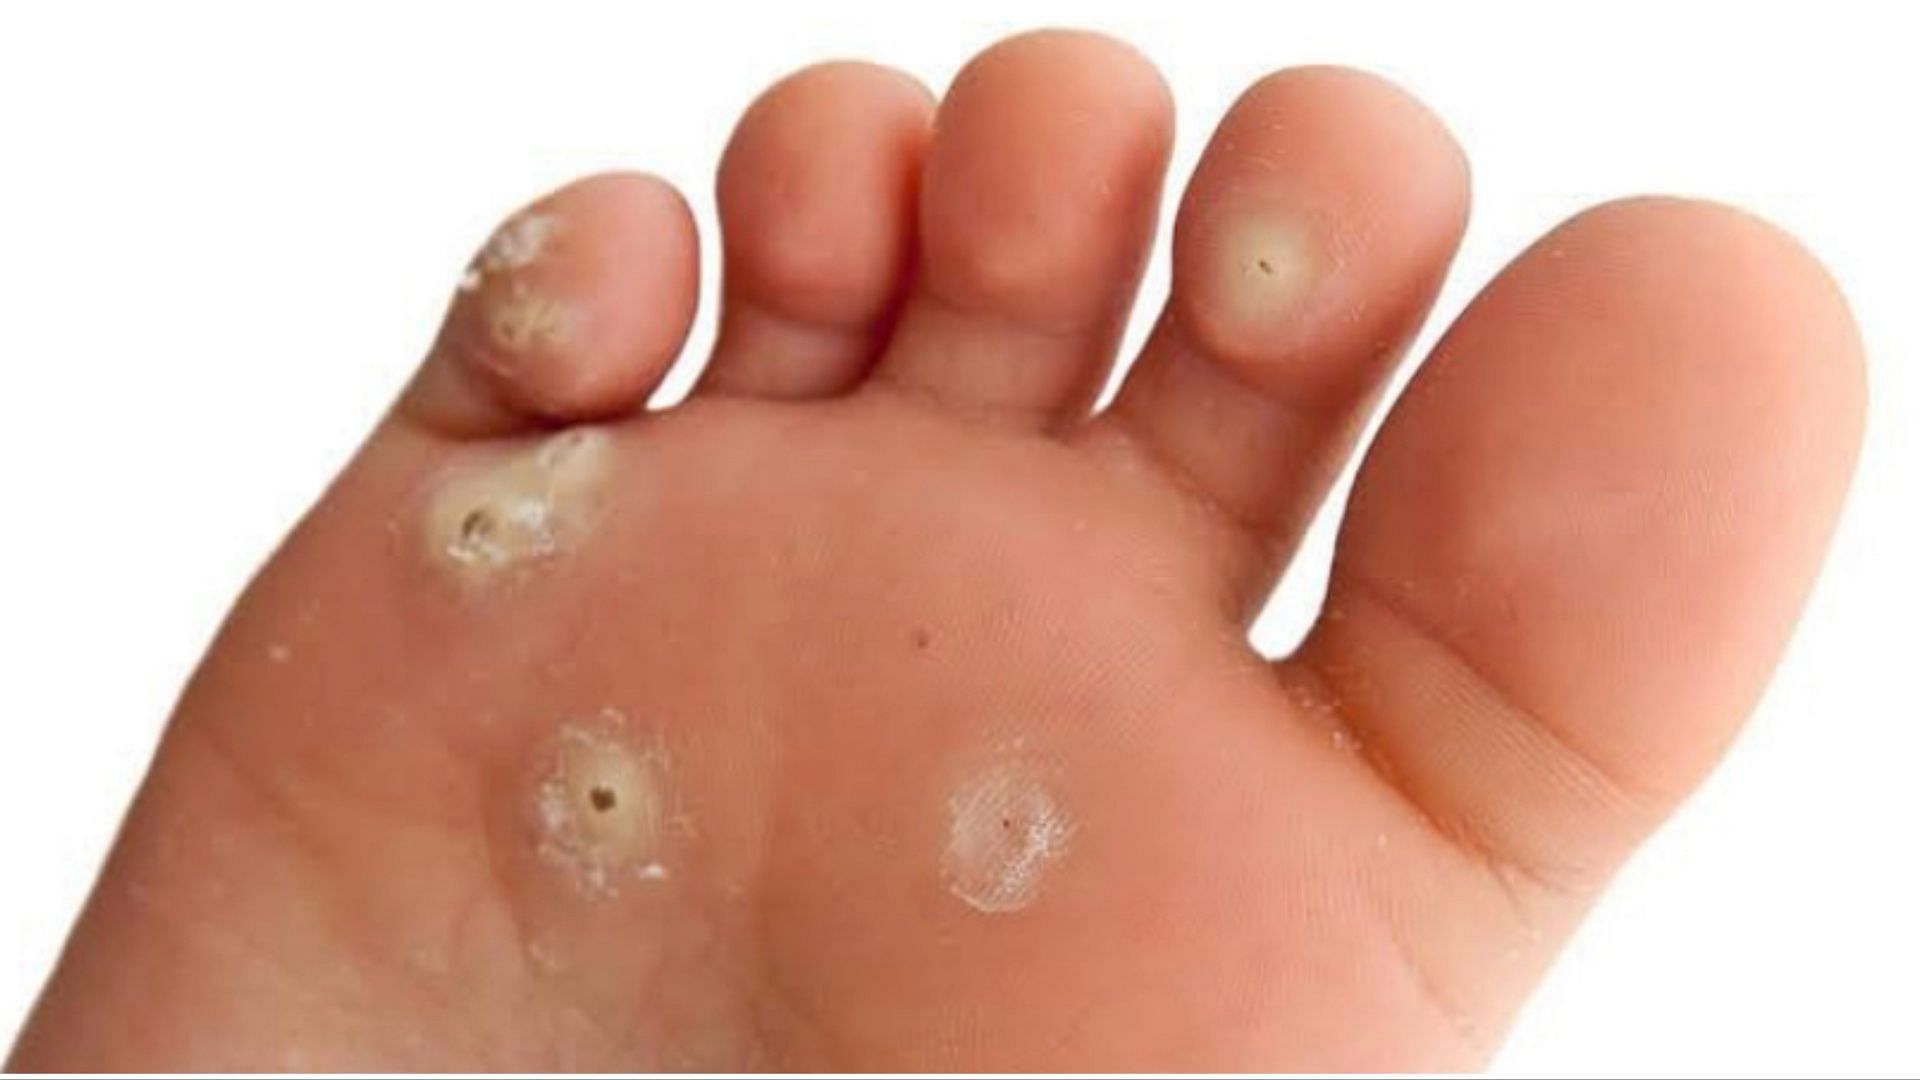 Plantar warts are caused by the HPV virus. (Photo via Instagram/podiatryfirst)